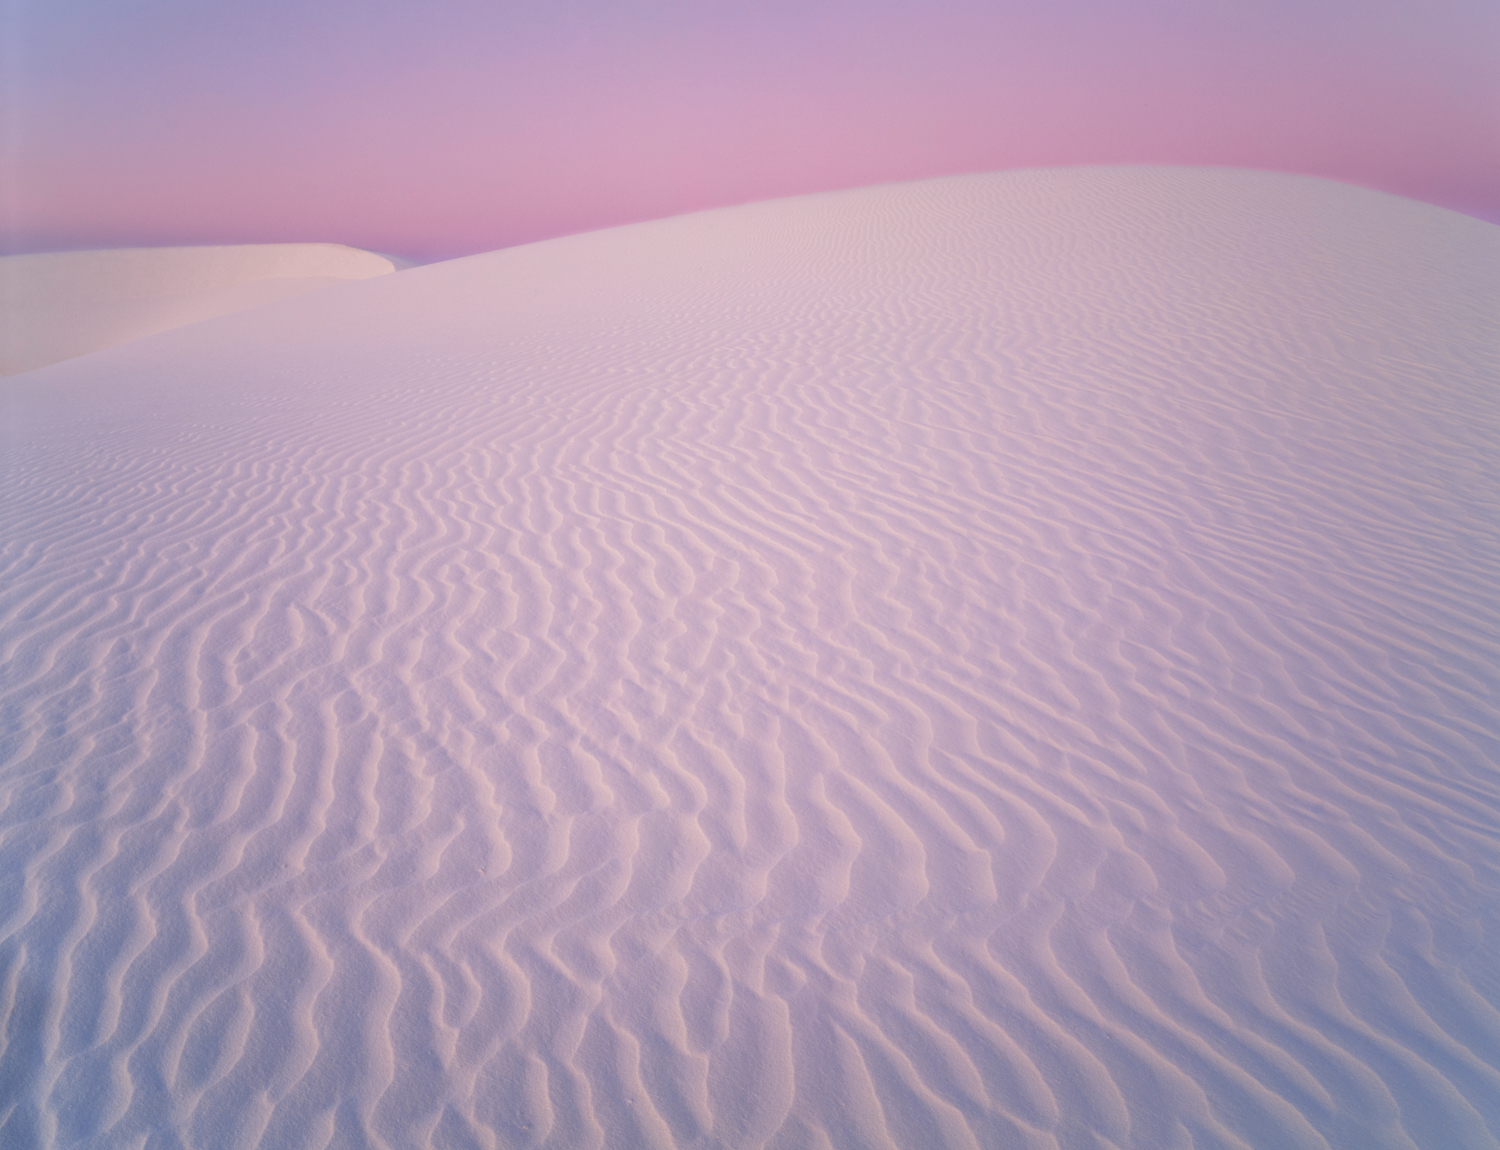 ethereal pink sand dunes against a pink sunset